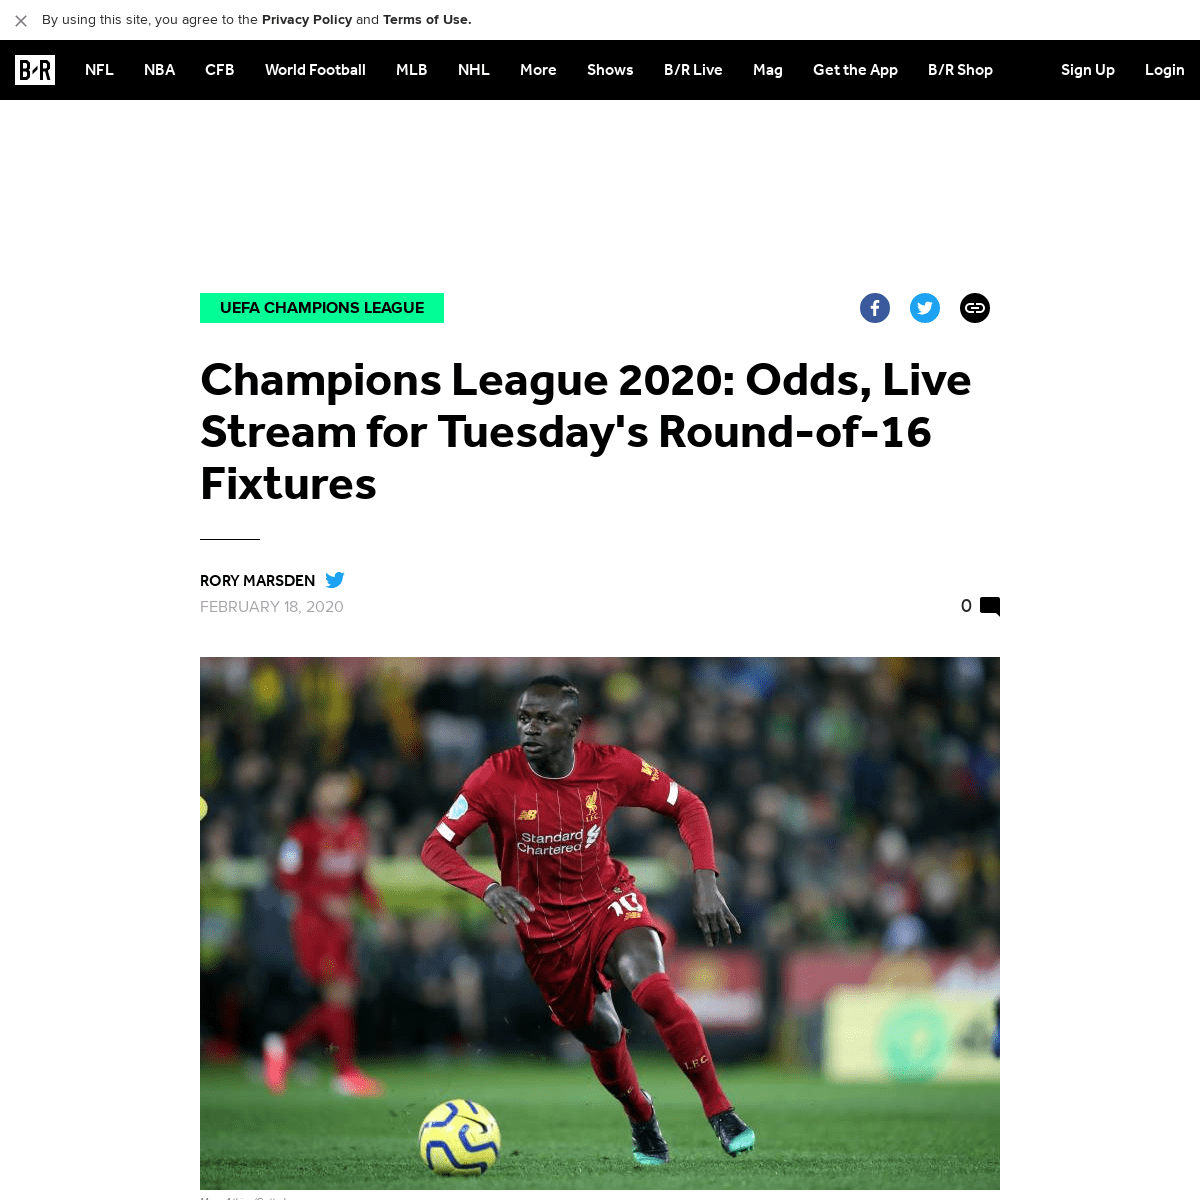 A complete backup of bleacherreport.com/articles/2876569-champions-league-2020-odds-live-stream-for-tuesdays-round-of-16-fixture